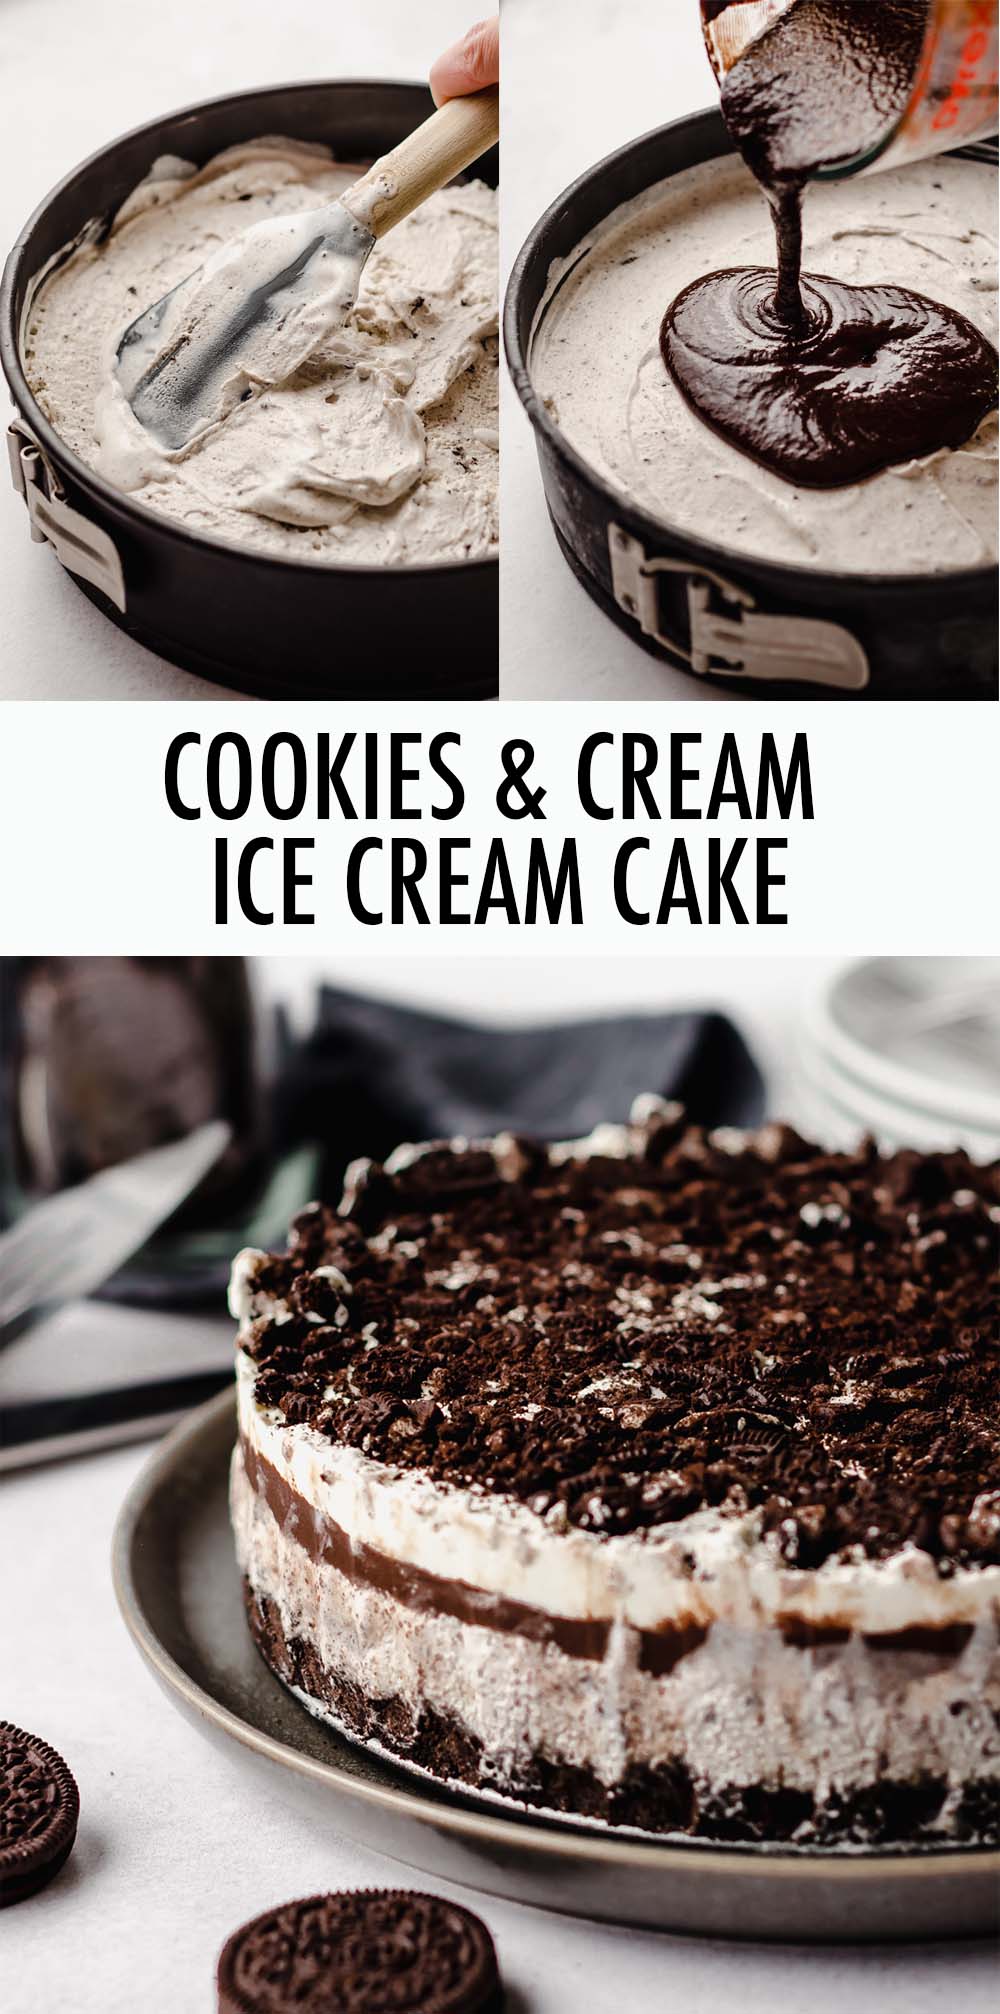 Make your own easy layered ice cream cake at home with store-bought ice cream, gooey hot fudge, creamy whipped cream topping, and plenty of Oreos in each bite. via @frshaprilflours